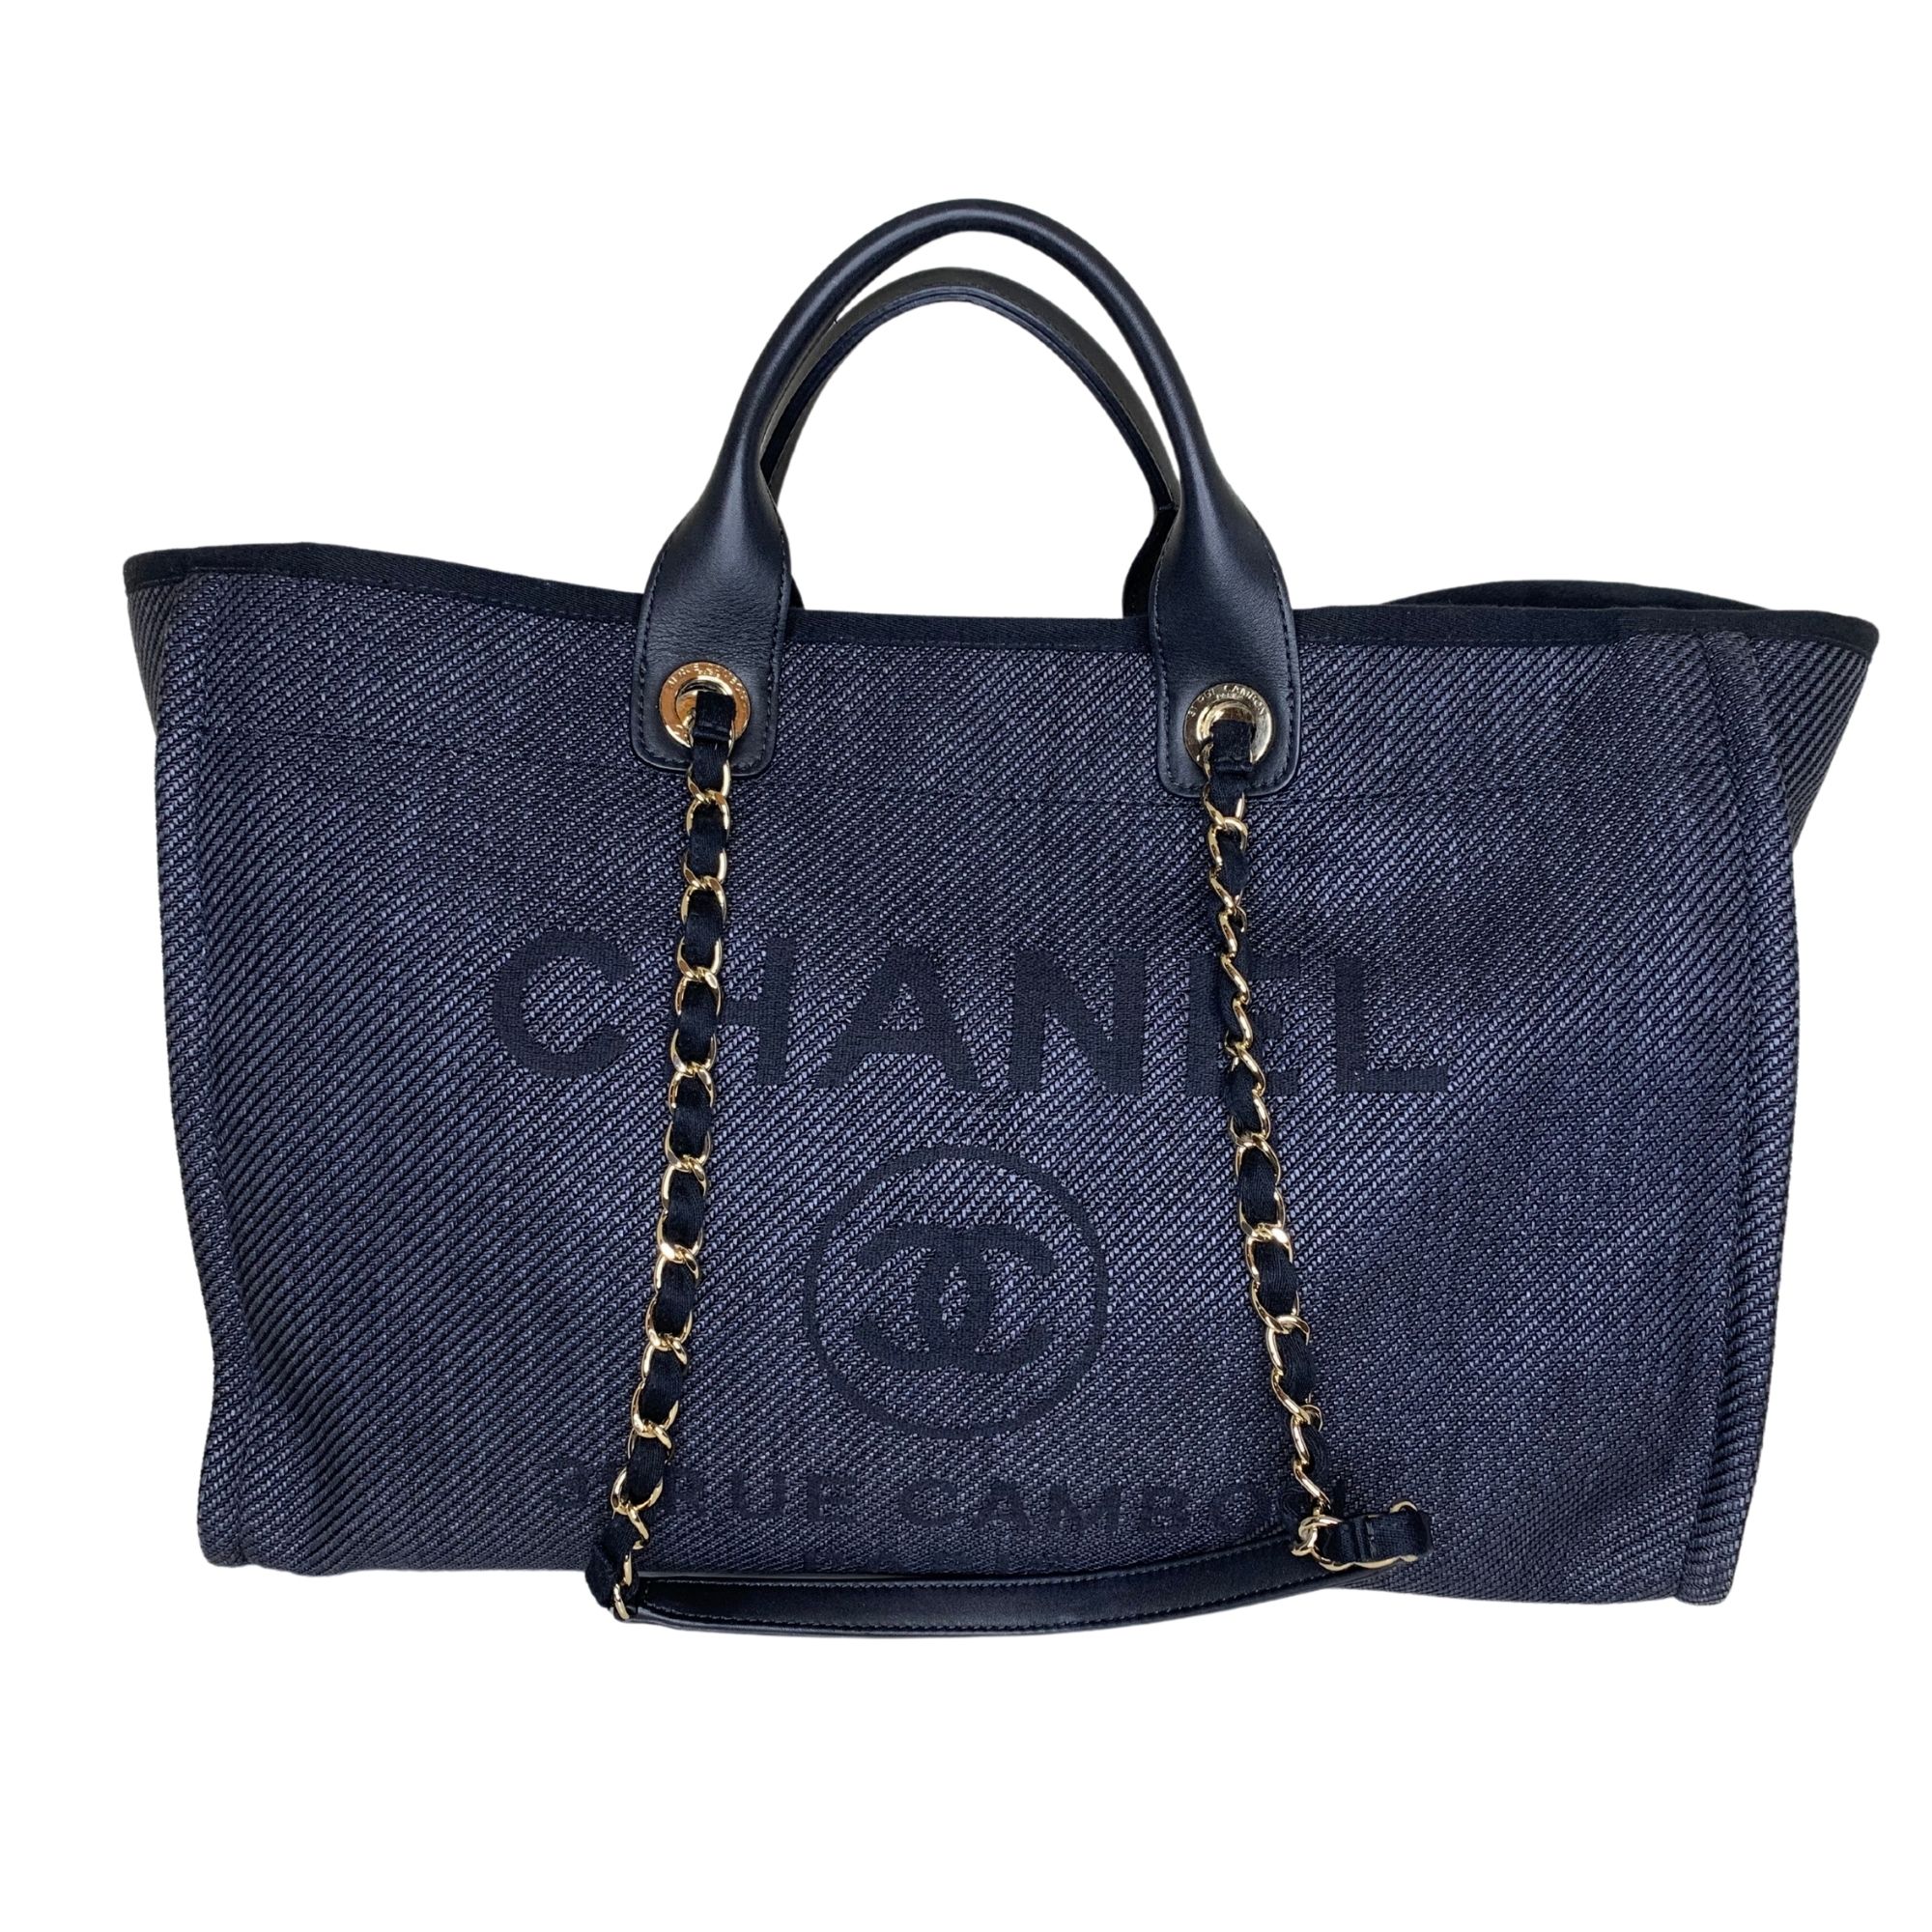 Chanel Large Deauville, Navy